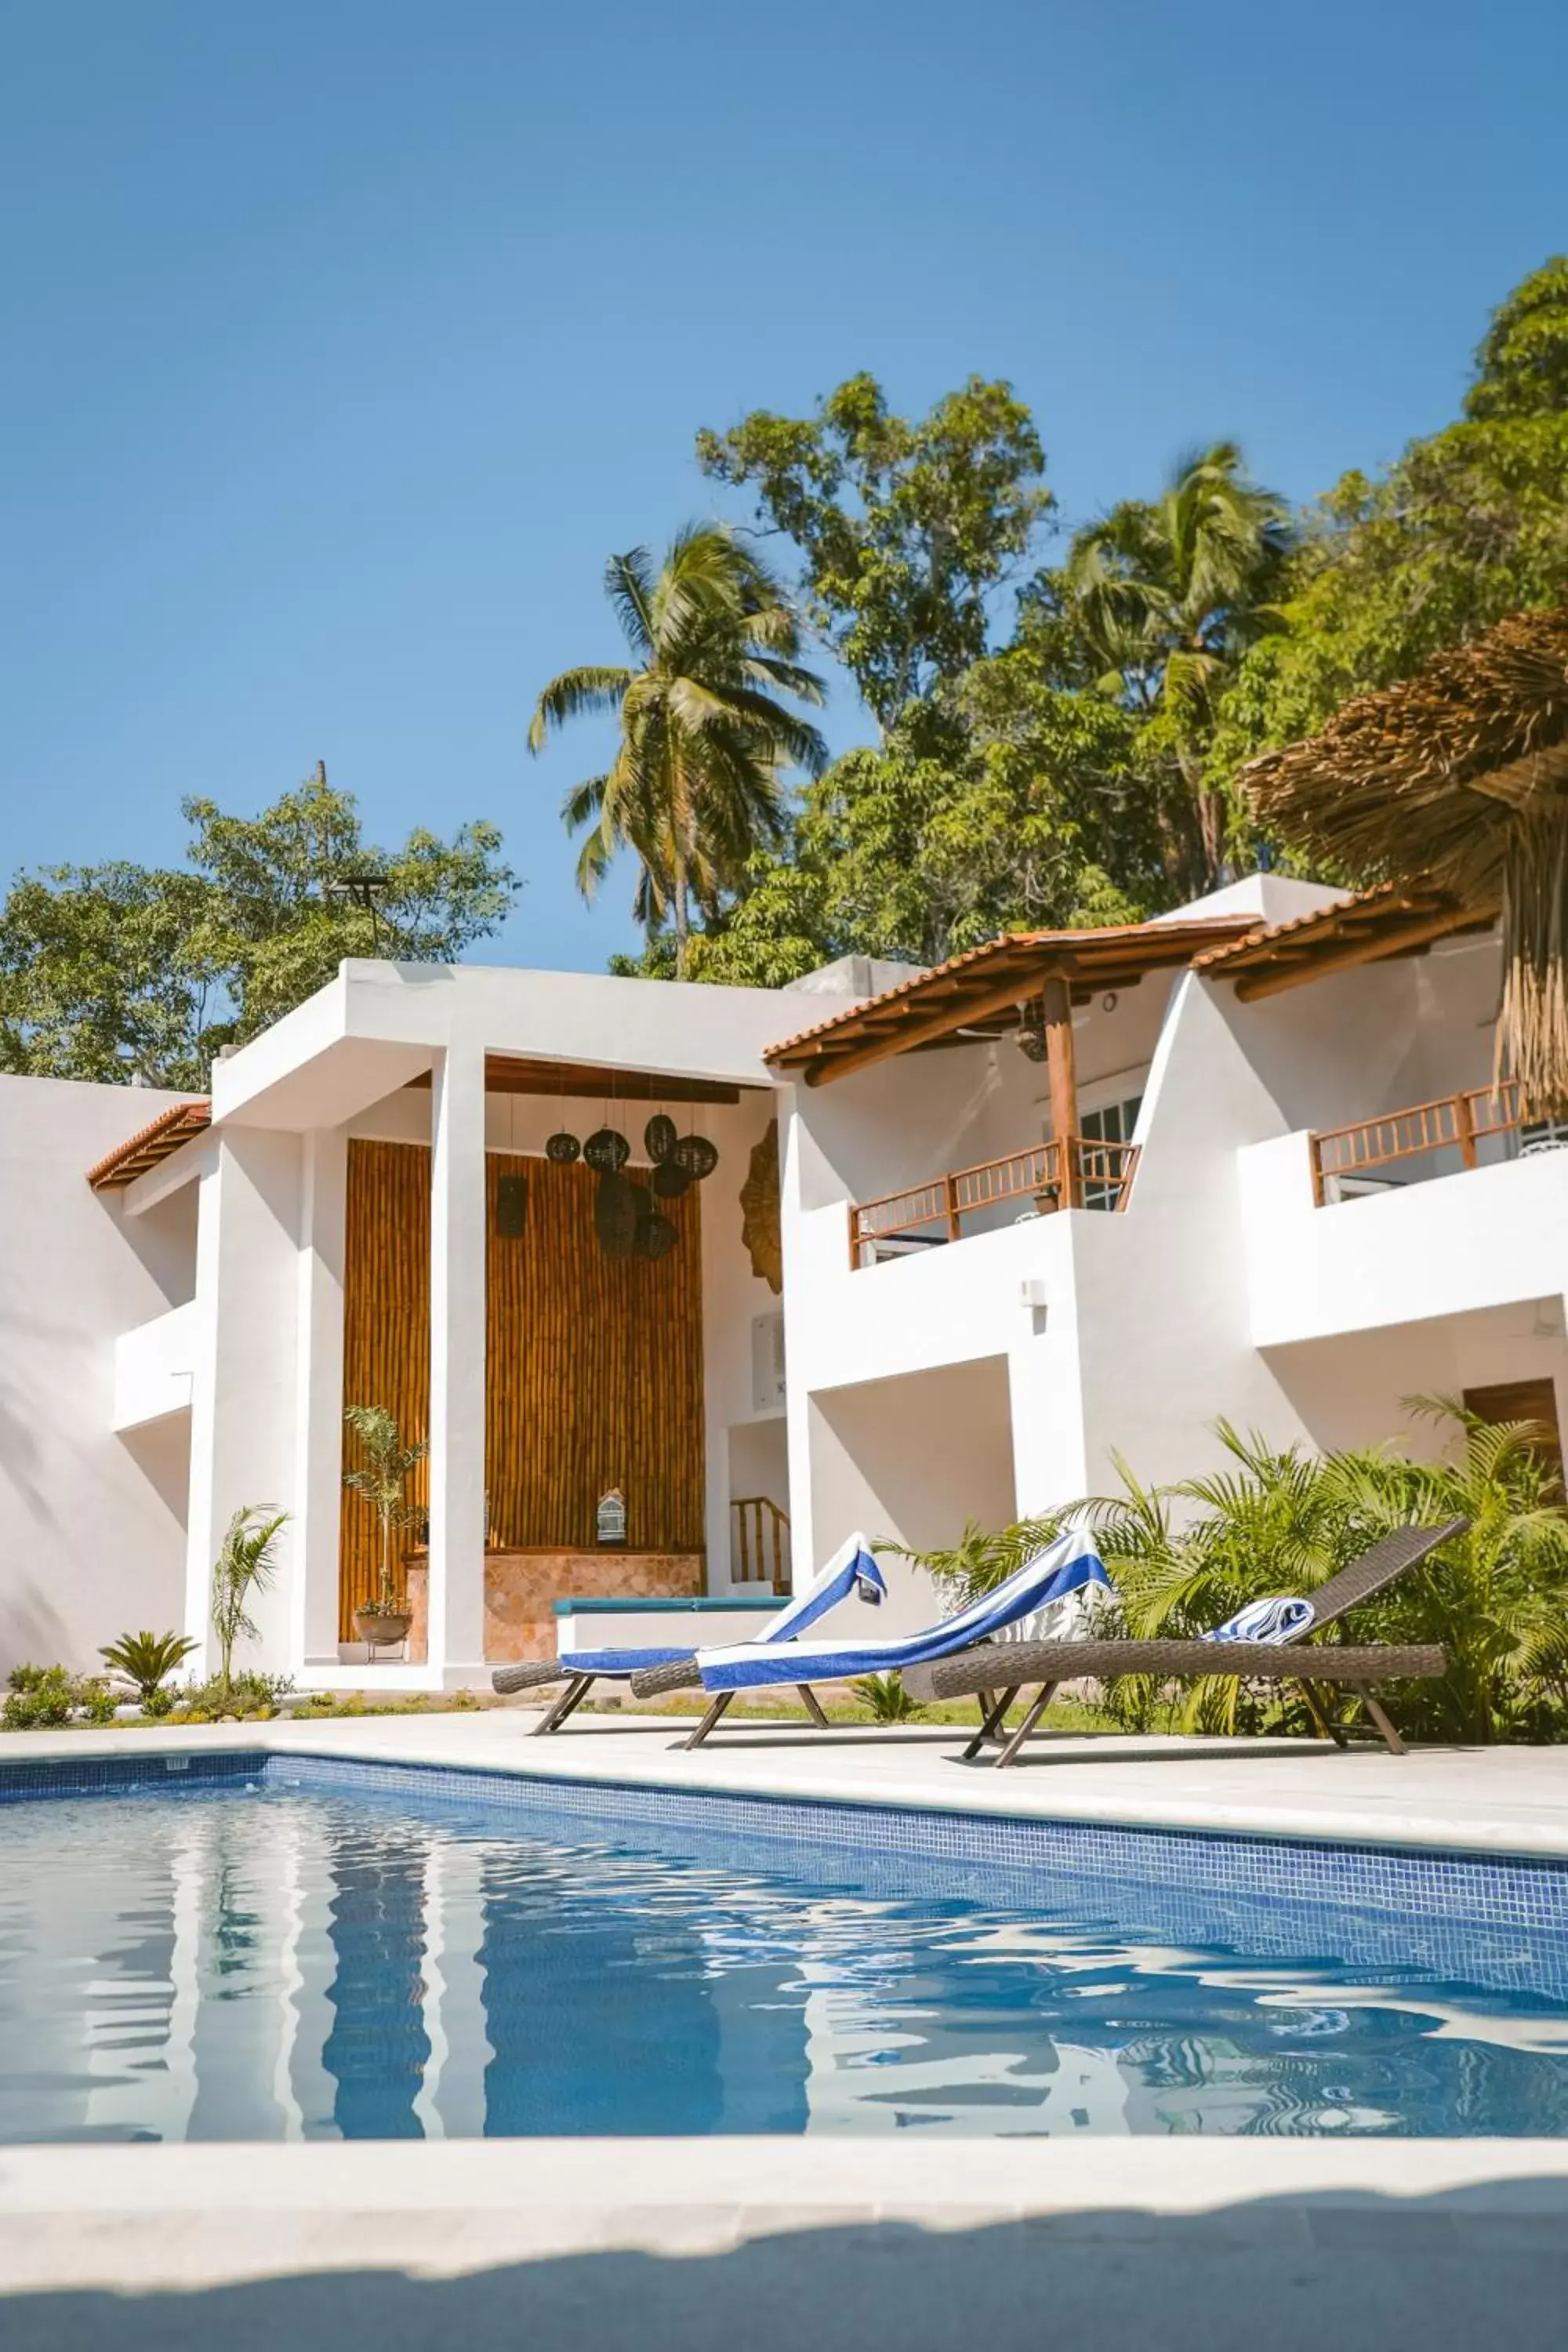 Property building, Swimming Pool in Solez Zihuatanejo